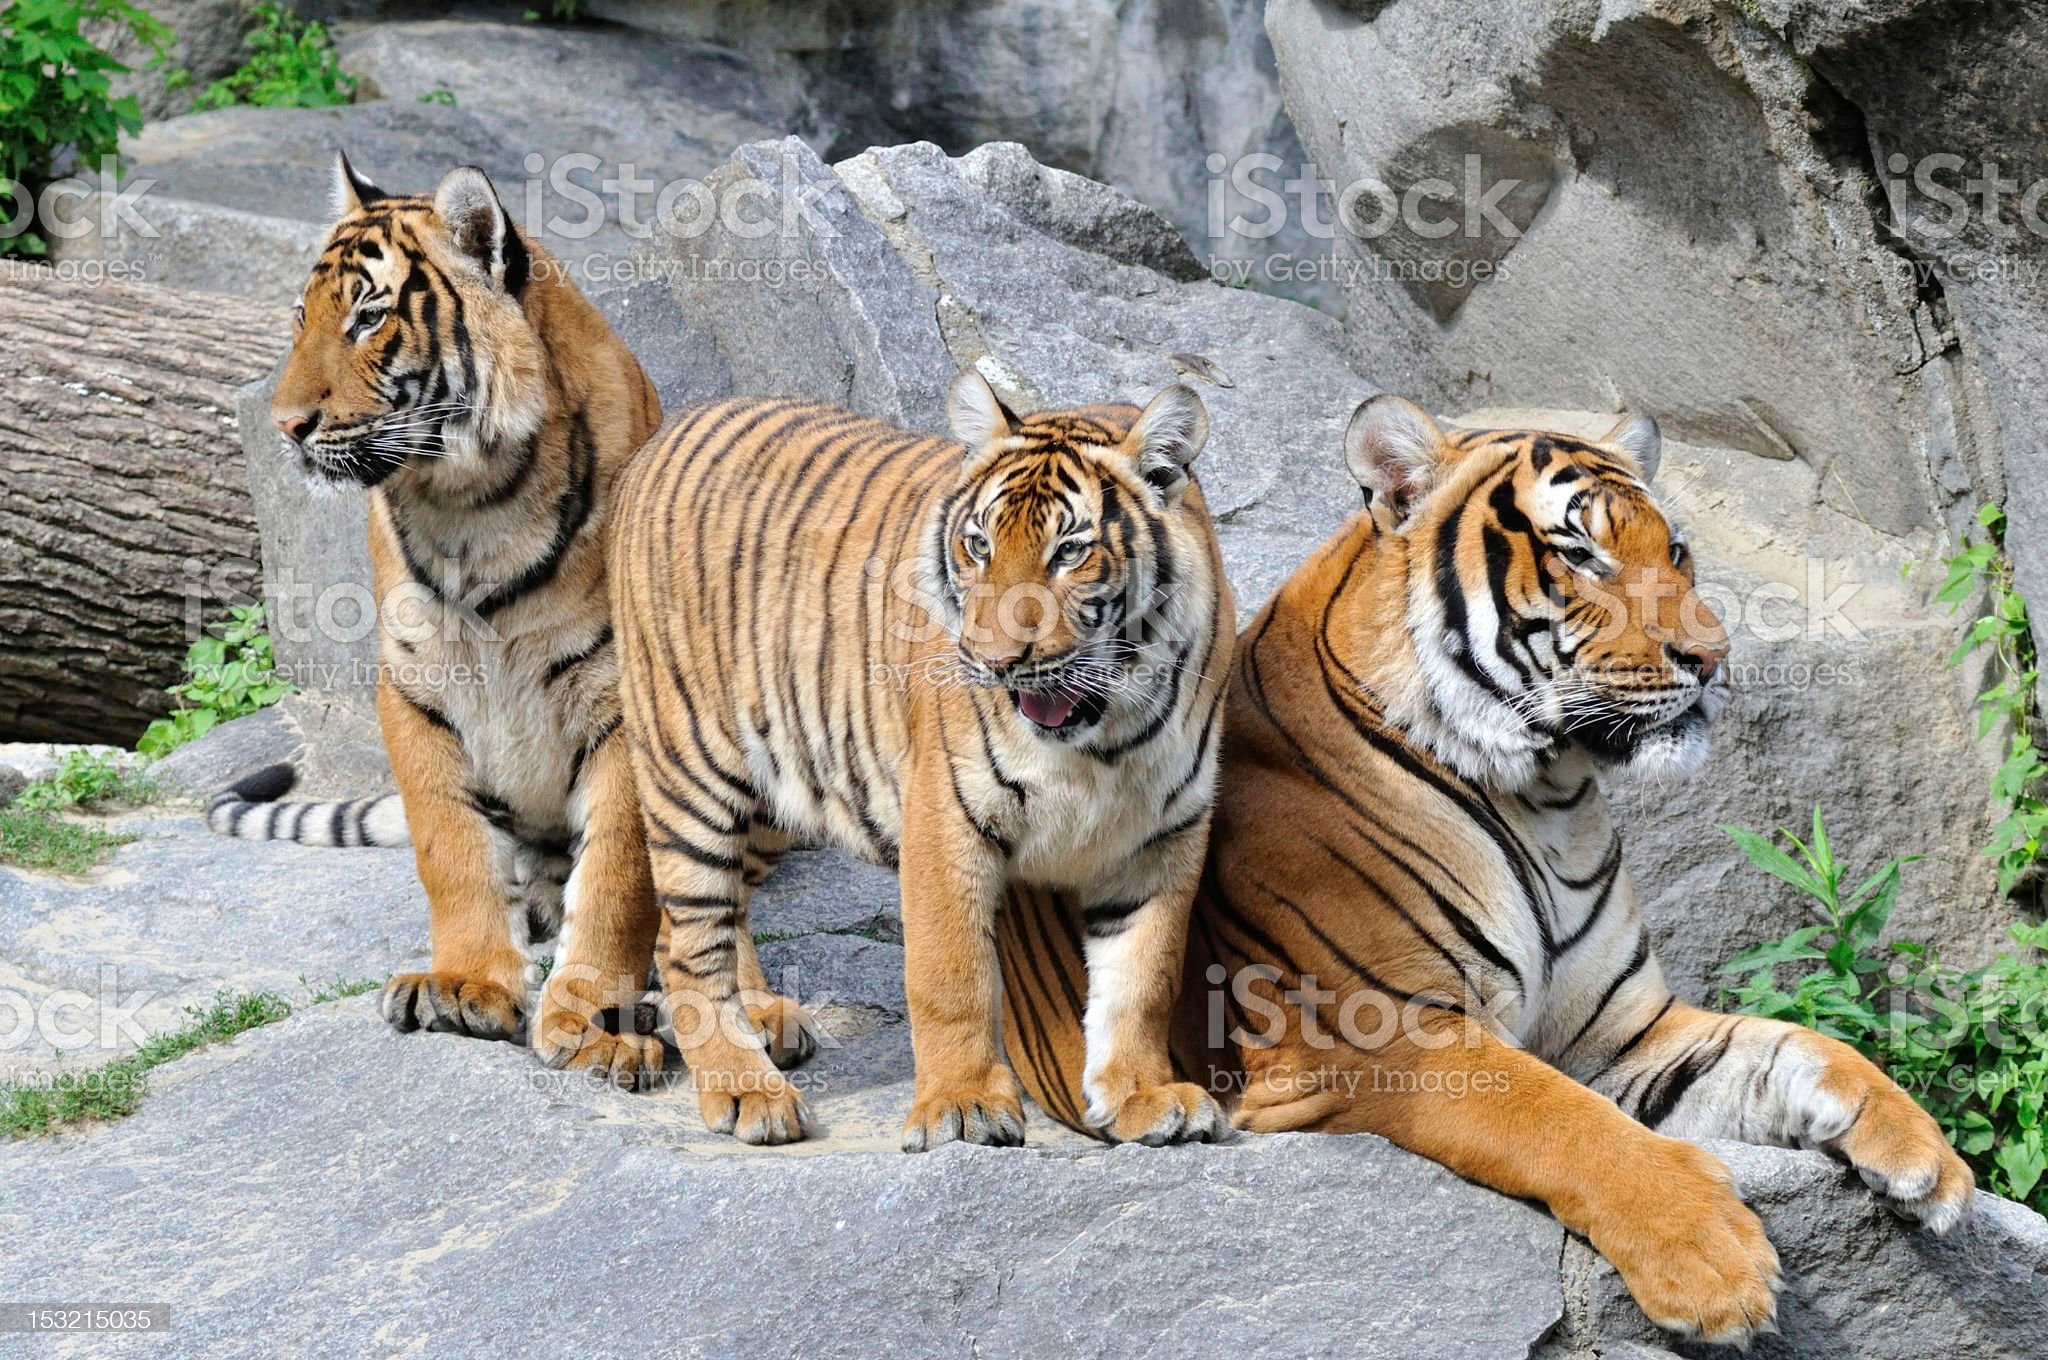 Tiger Family Image Now